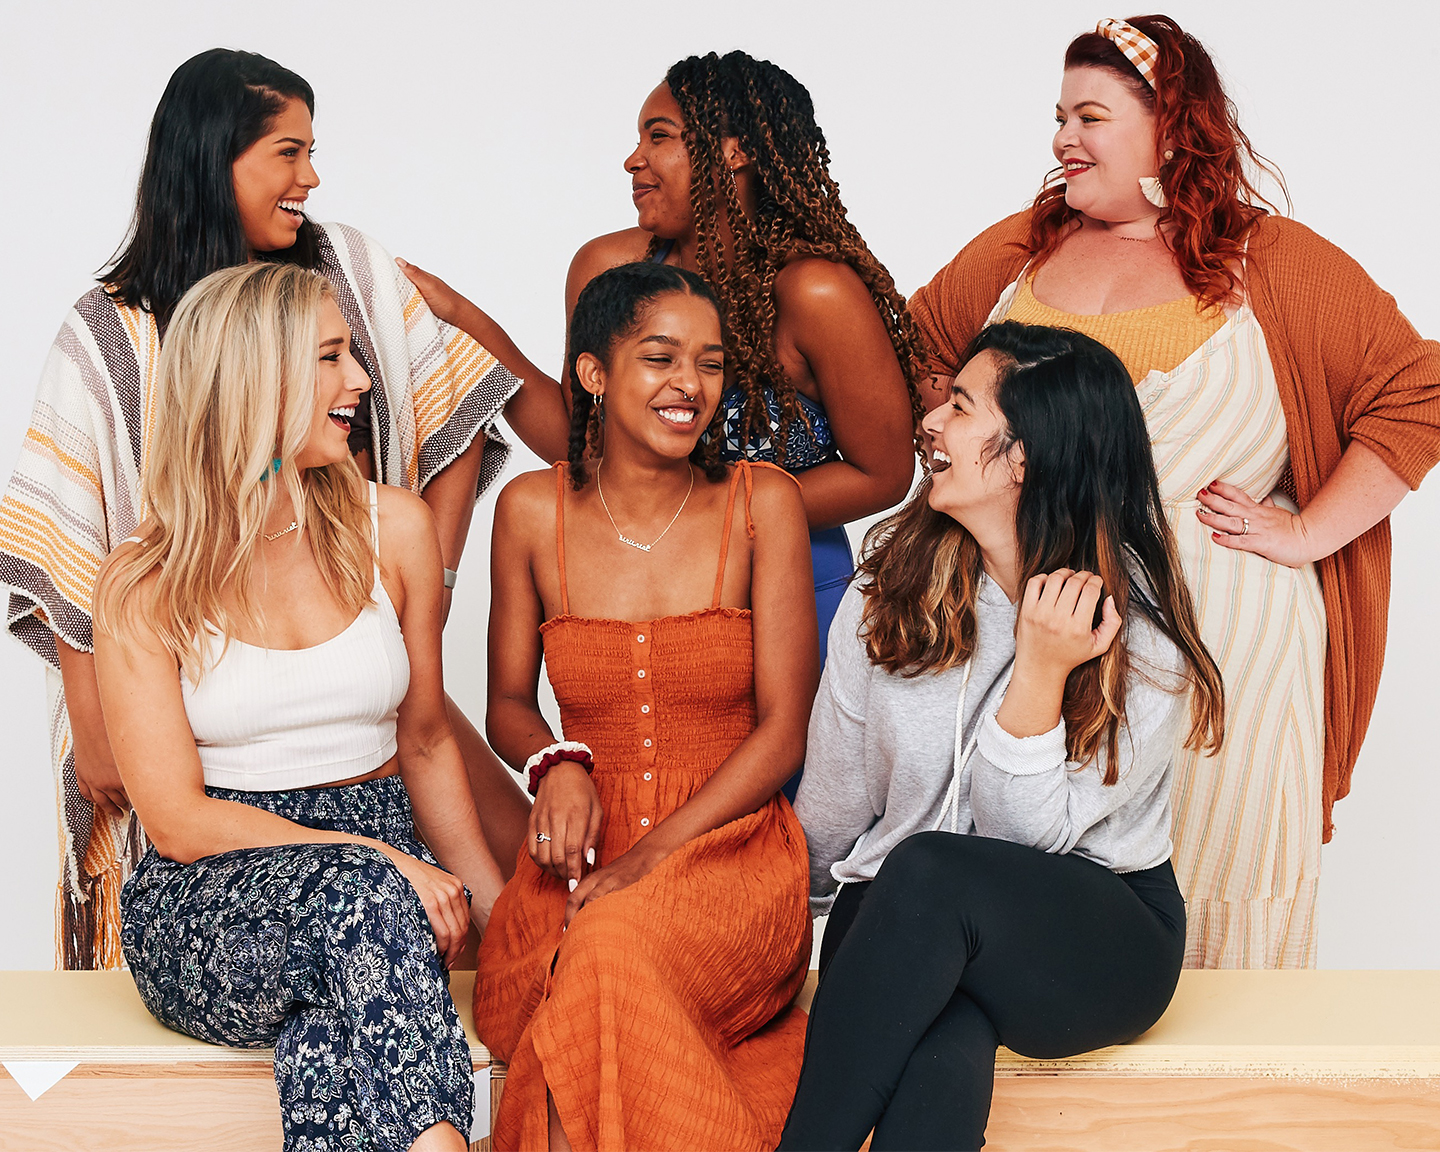 Meet your new #AerieREAL Ambassadors! - #AerieREAL Life